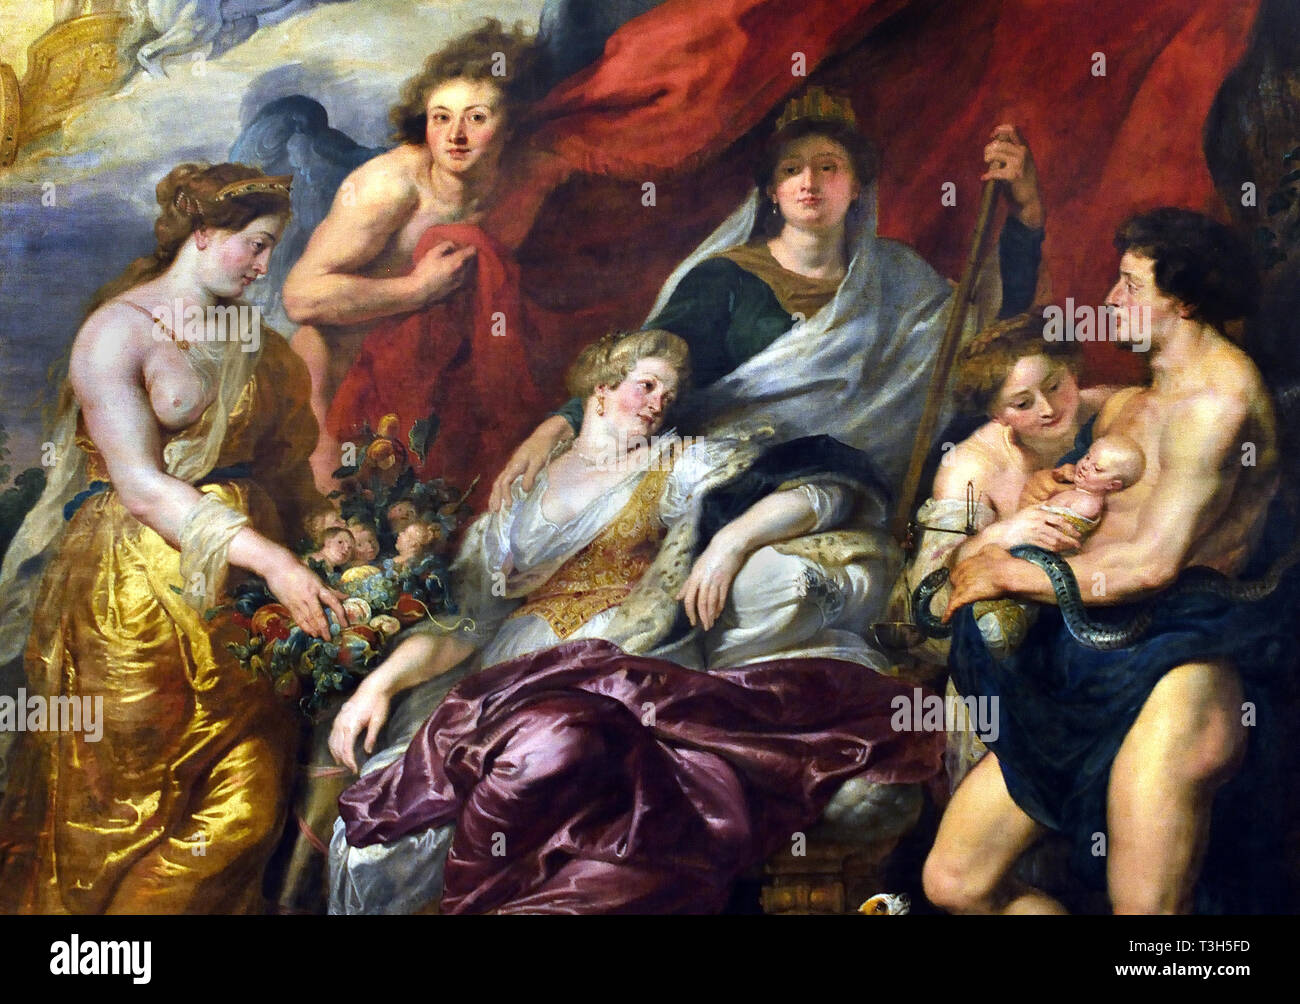 The Birth of the Dauphin (Louis XIII) at Fontainebleau - The Marie de' Medici Cycle 1622-1624 by Peter Paul Rubens commissioned by Queen Marie de' Medici, widow of King Henry IV of France, for the Luxembourg Palace in Paris, Stock Photo